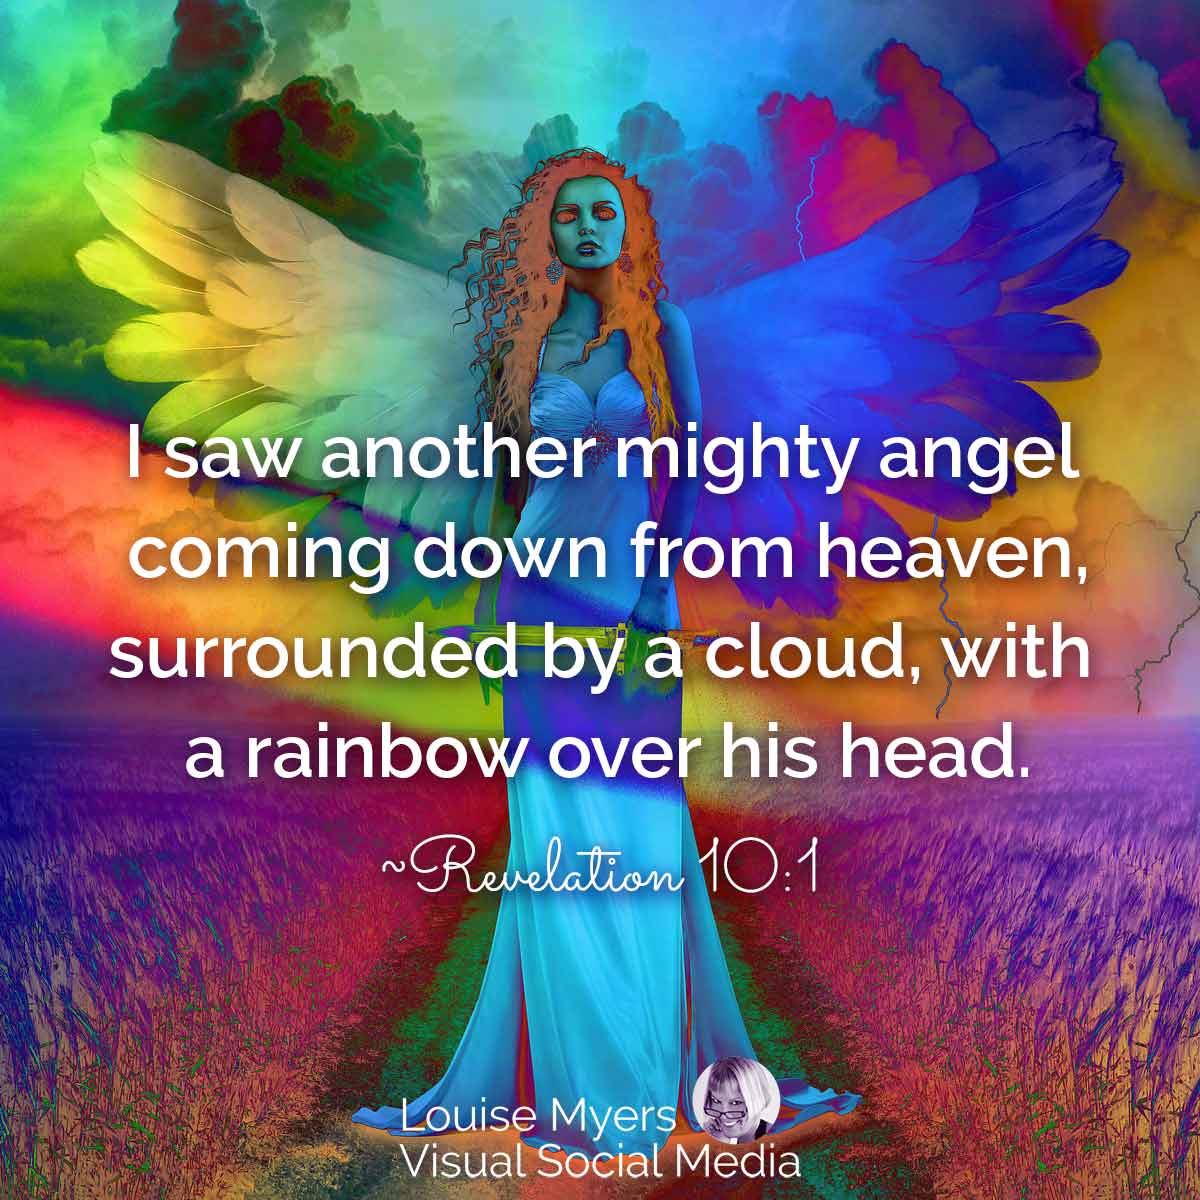 colorful angel art has bible verse, I saw another mighty angel coming with a rainbow.